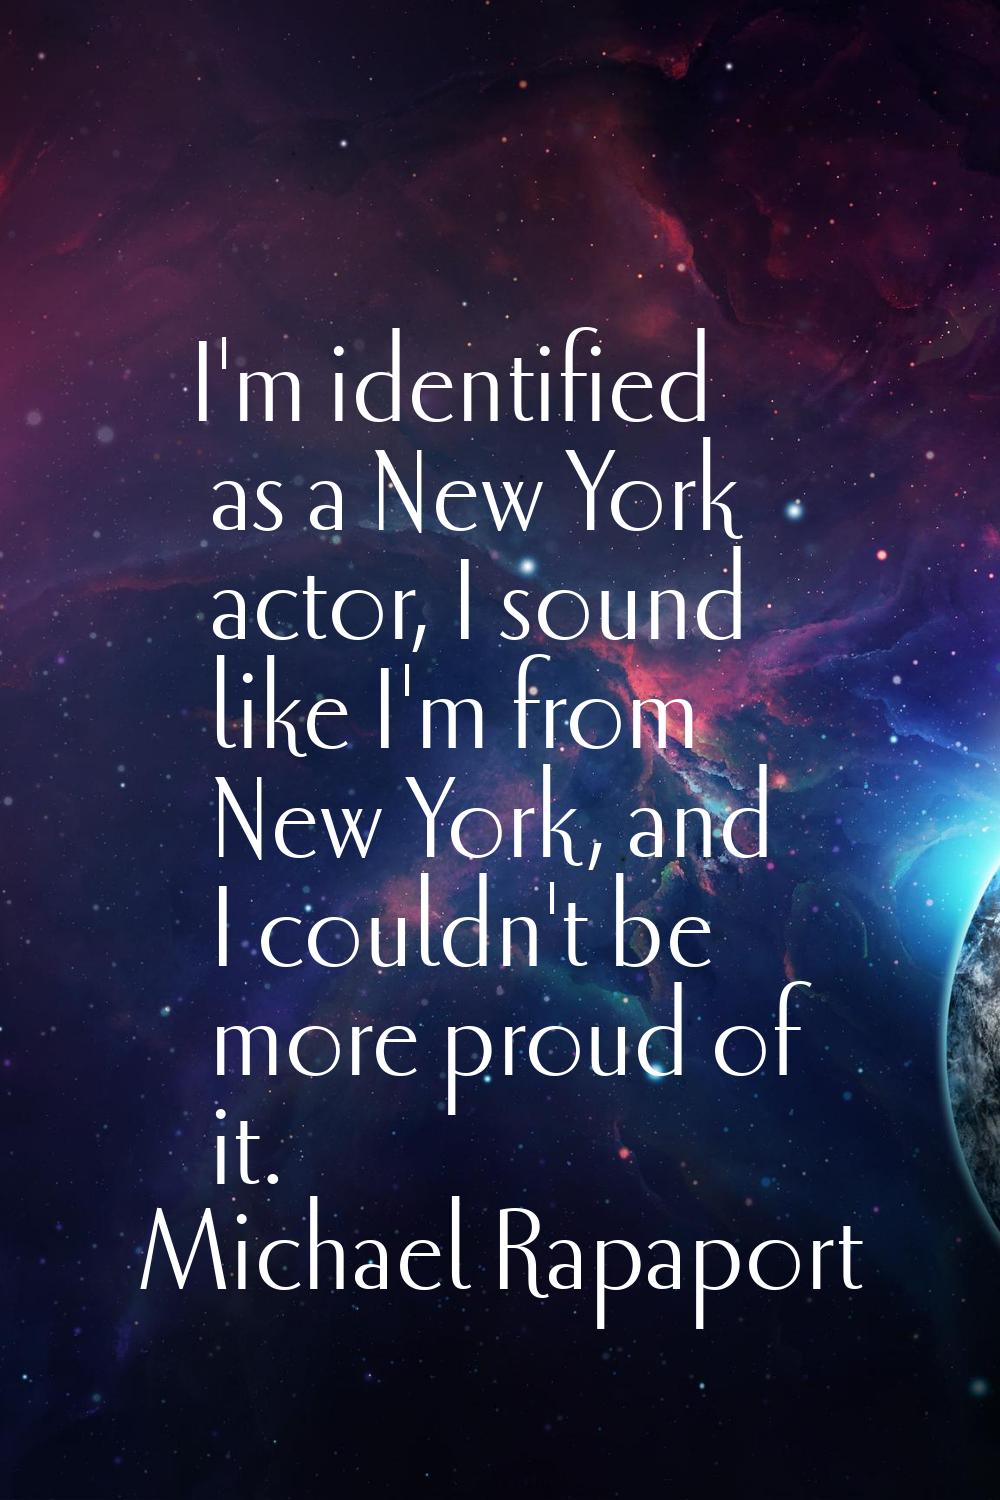 I'm identified as a New York actor, I sound like I'm from New York, and I couldn't be more proud of